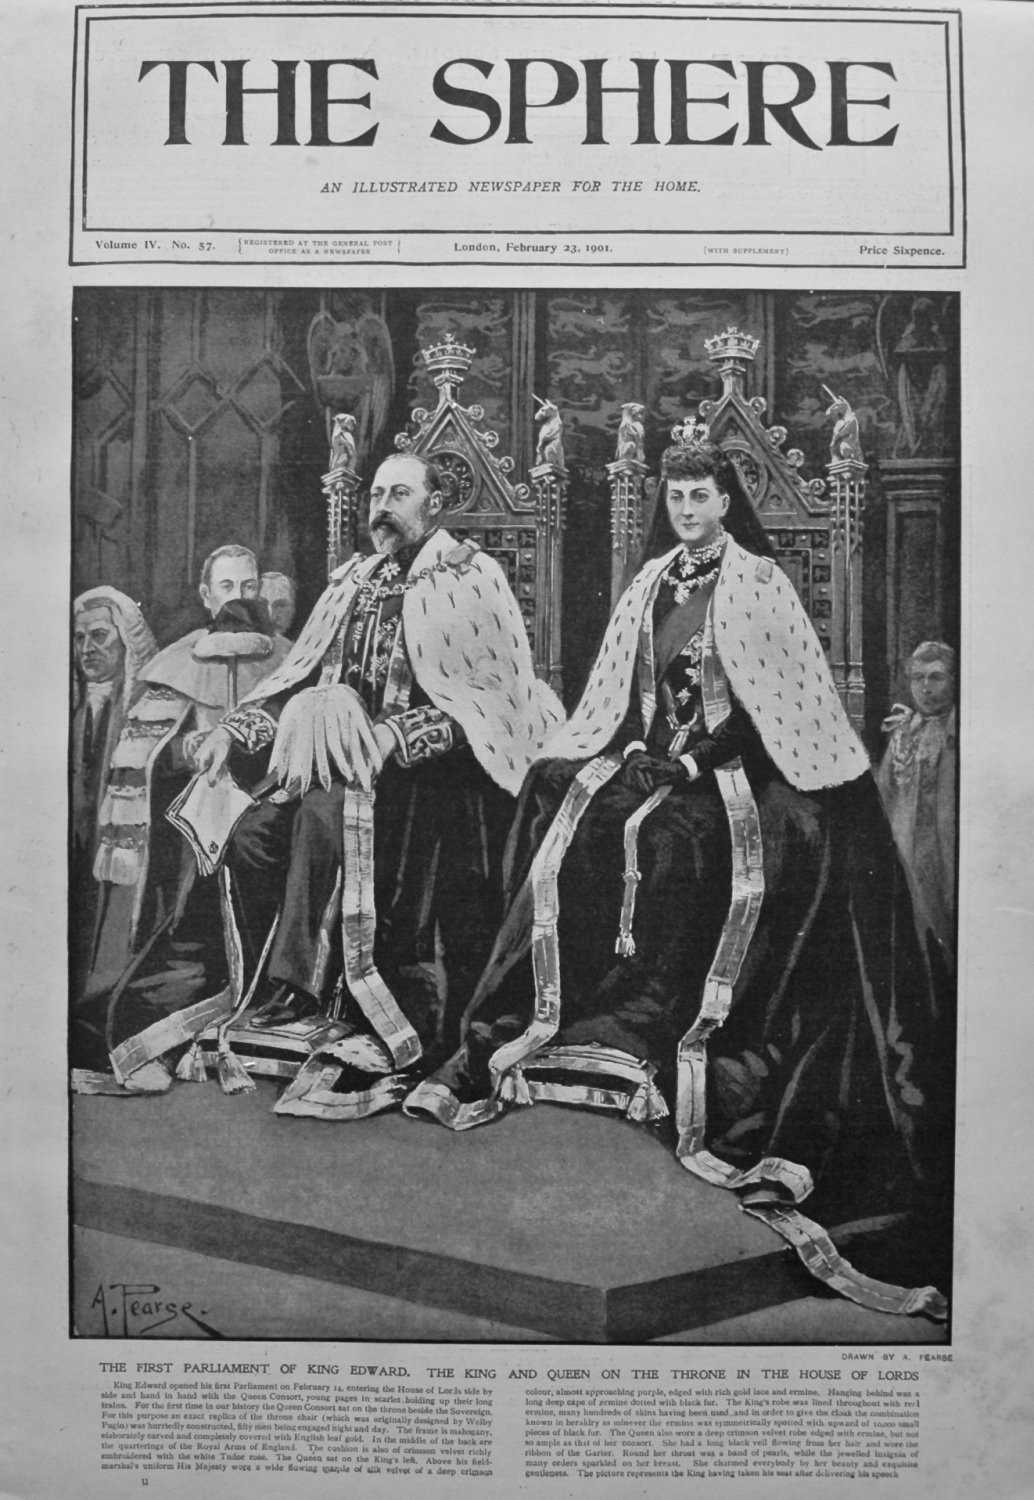 The First Parliament of King Edward. The King and Queen on the Throne in th